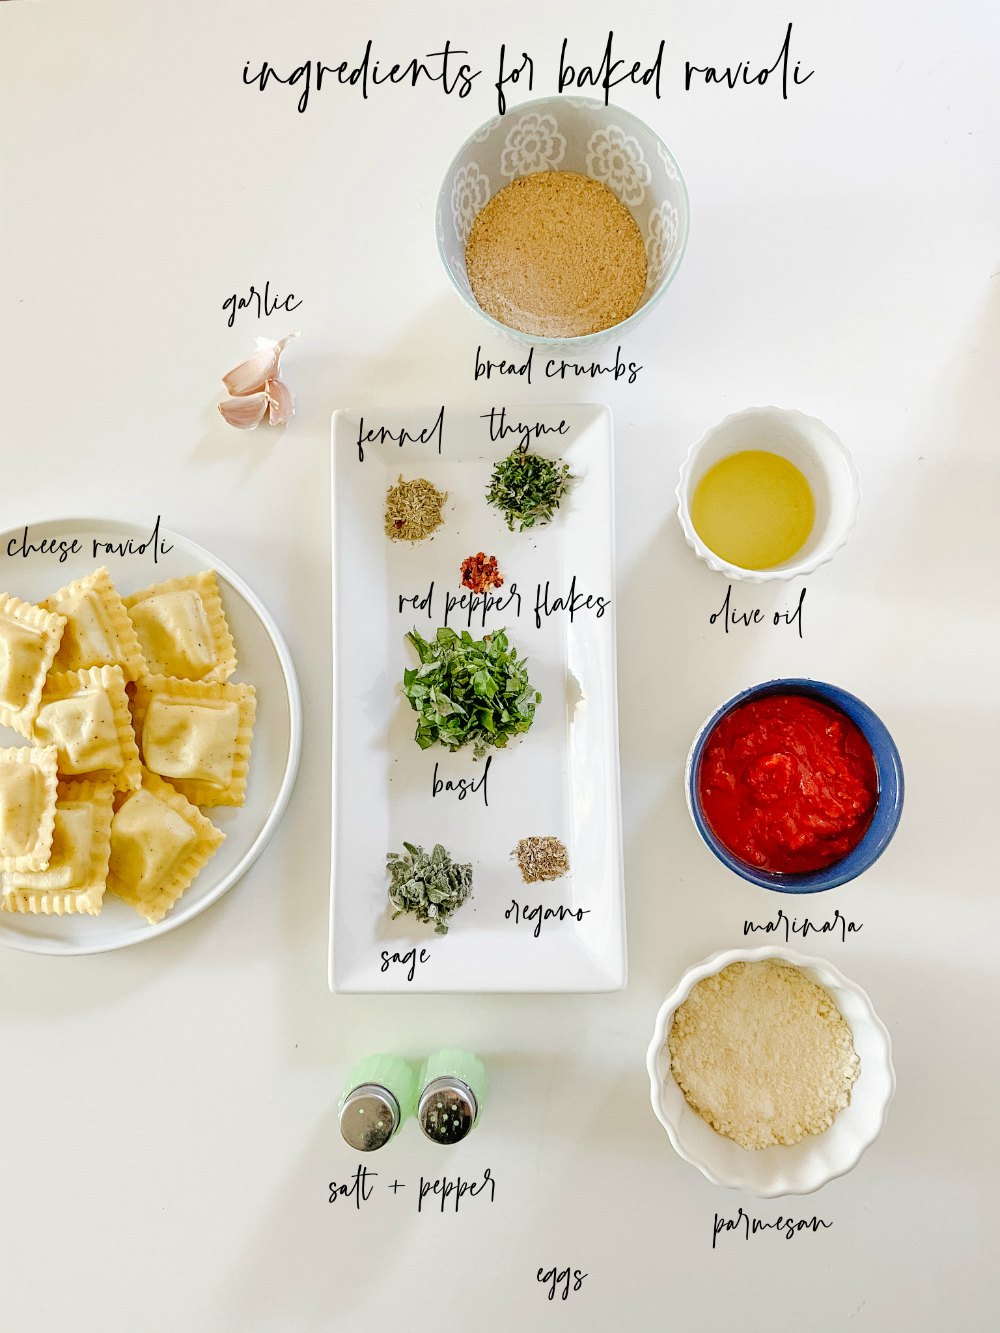 The Easiest Holiday Appetizer Your Kids Will Love -- Baked Ravioli! Here's a kid-friendly appetizer that's so easy to make. It's perfect for the holiday and your kids will ask for it all year! 